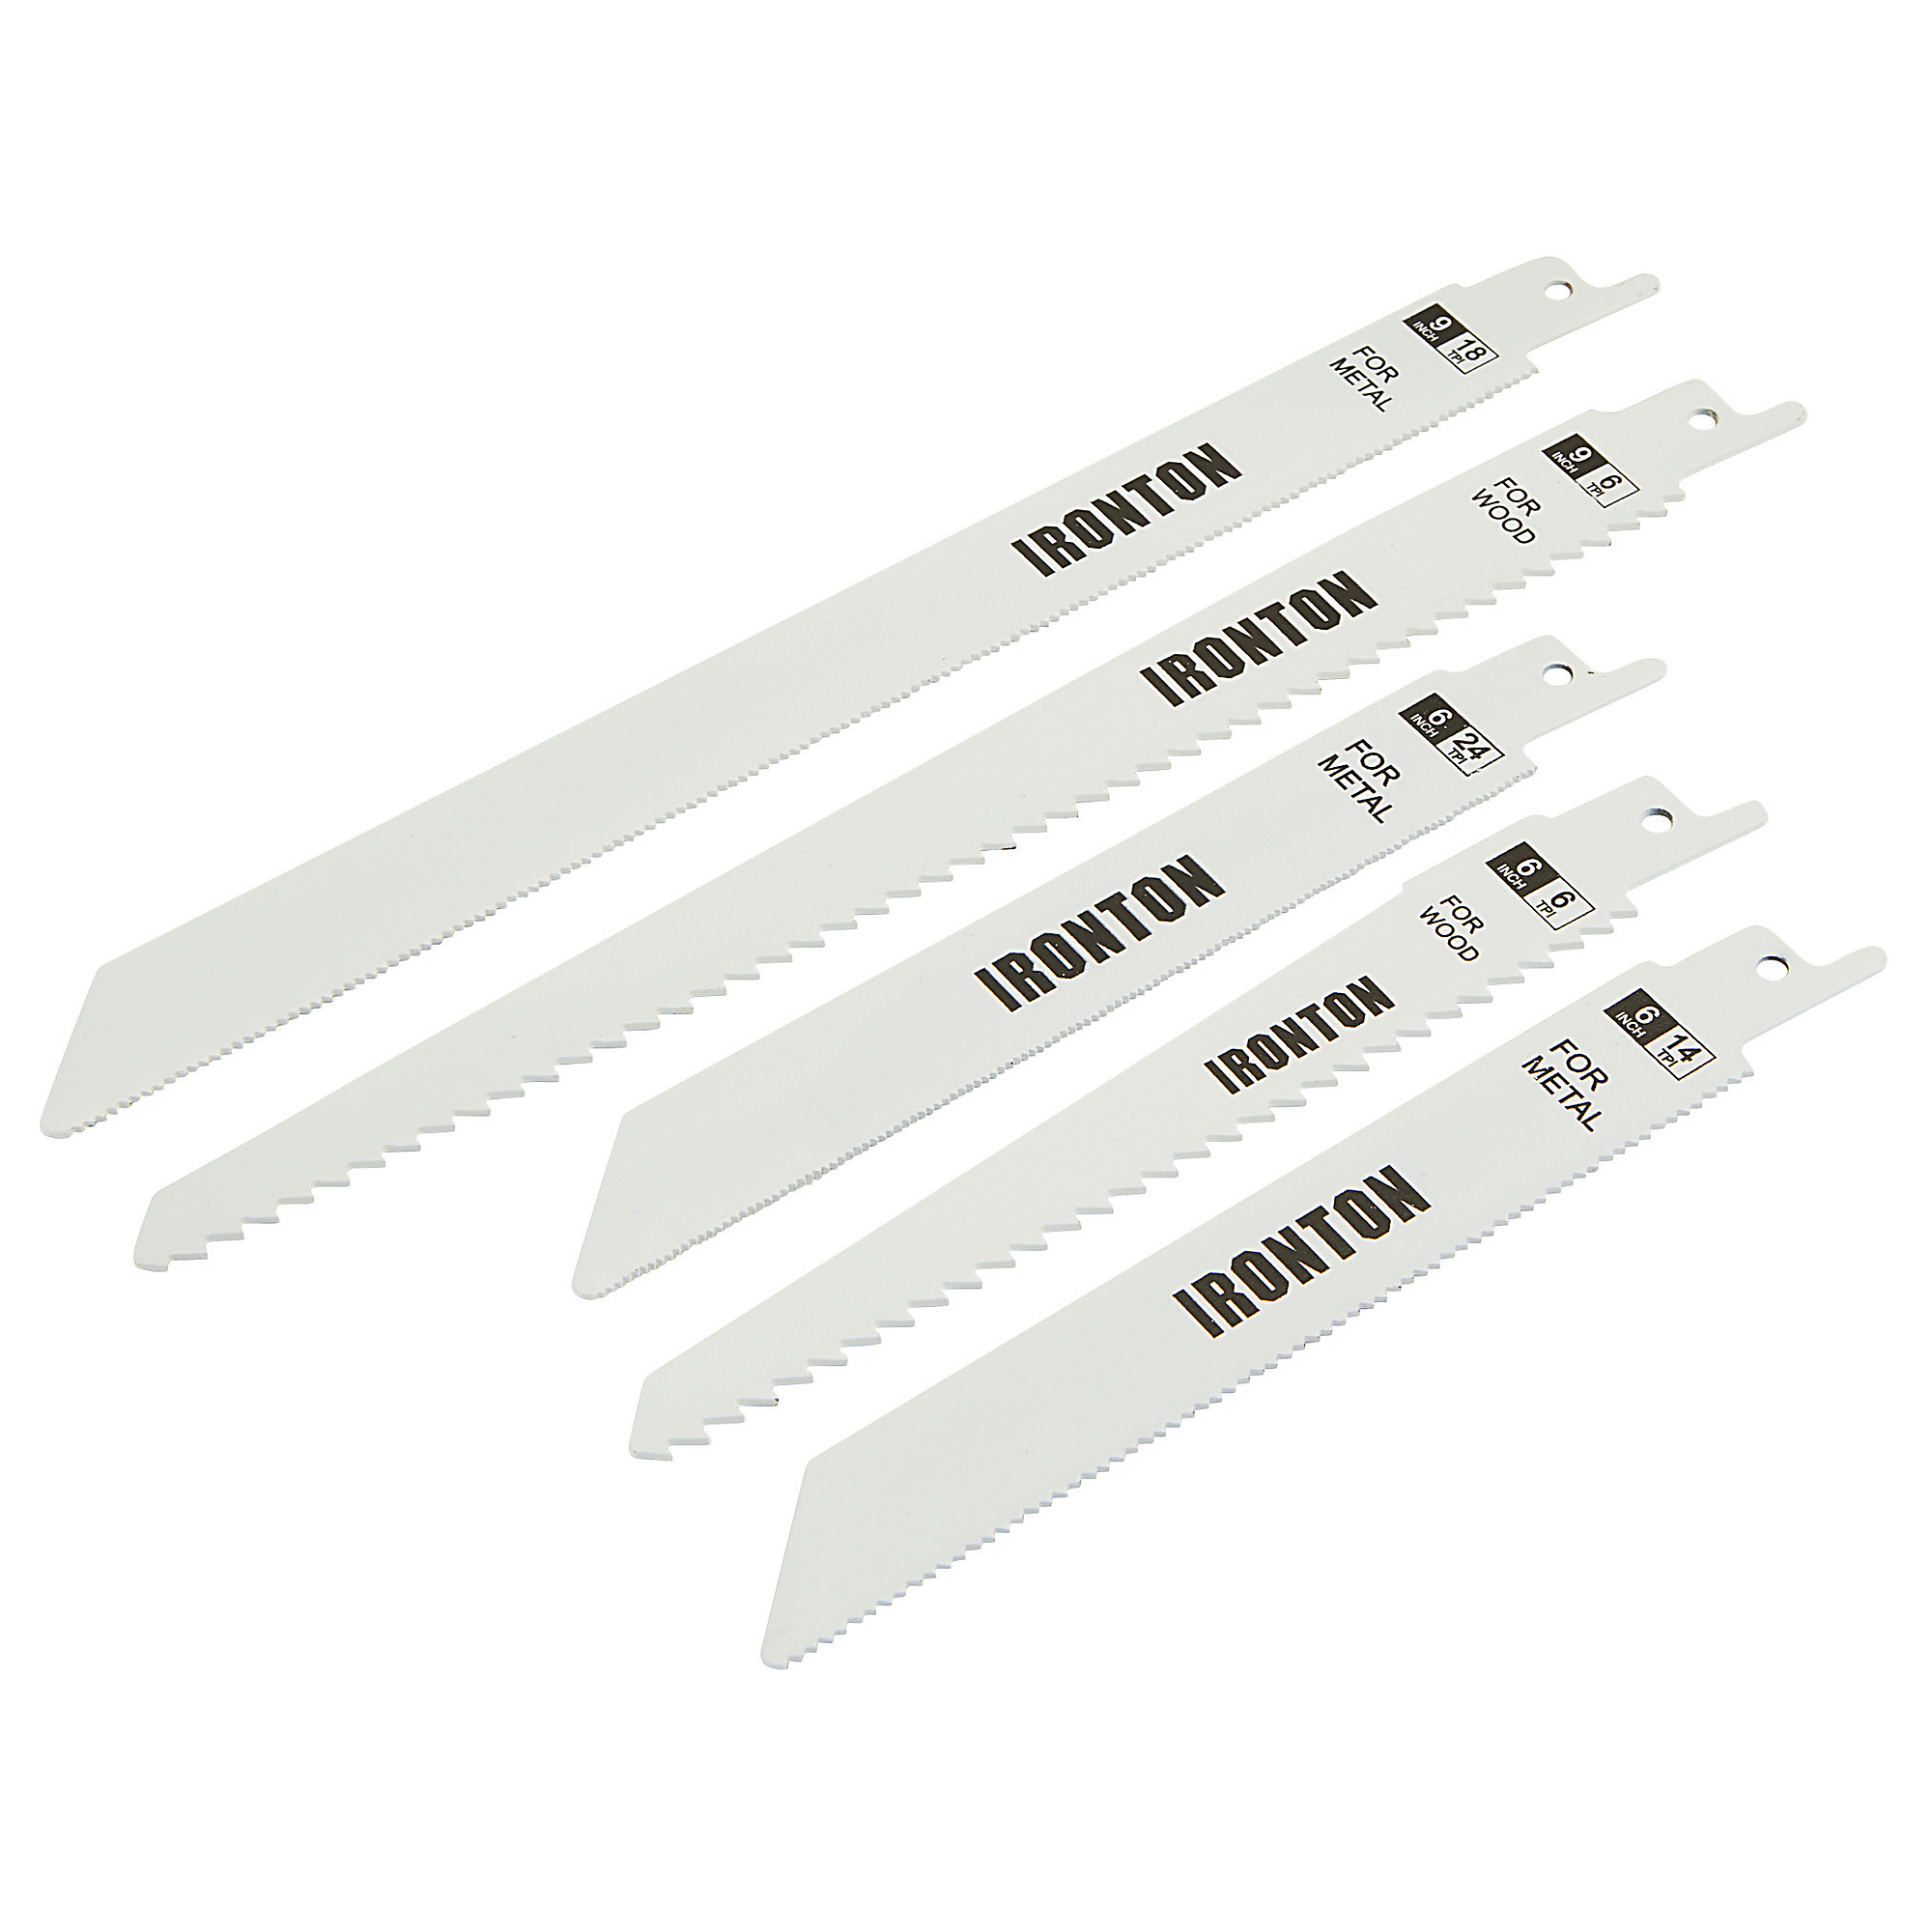 Diablo 9 in. 3 TPI Demo Carbide Reciprocating Saw Blades for Pruning and Clean Wood Cutting (5-Pack)